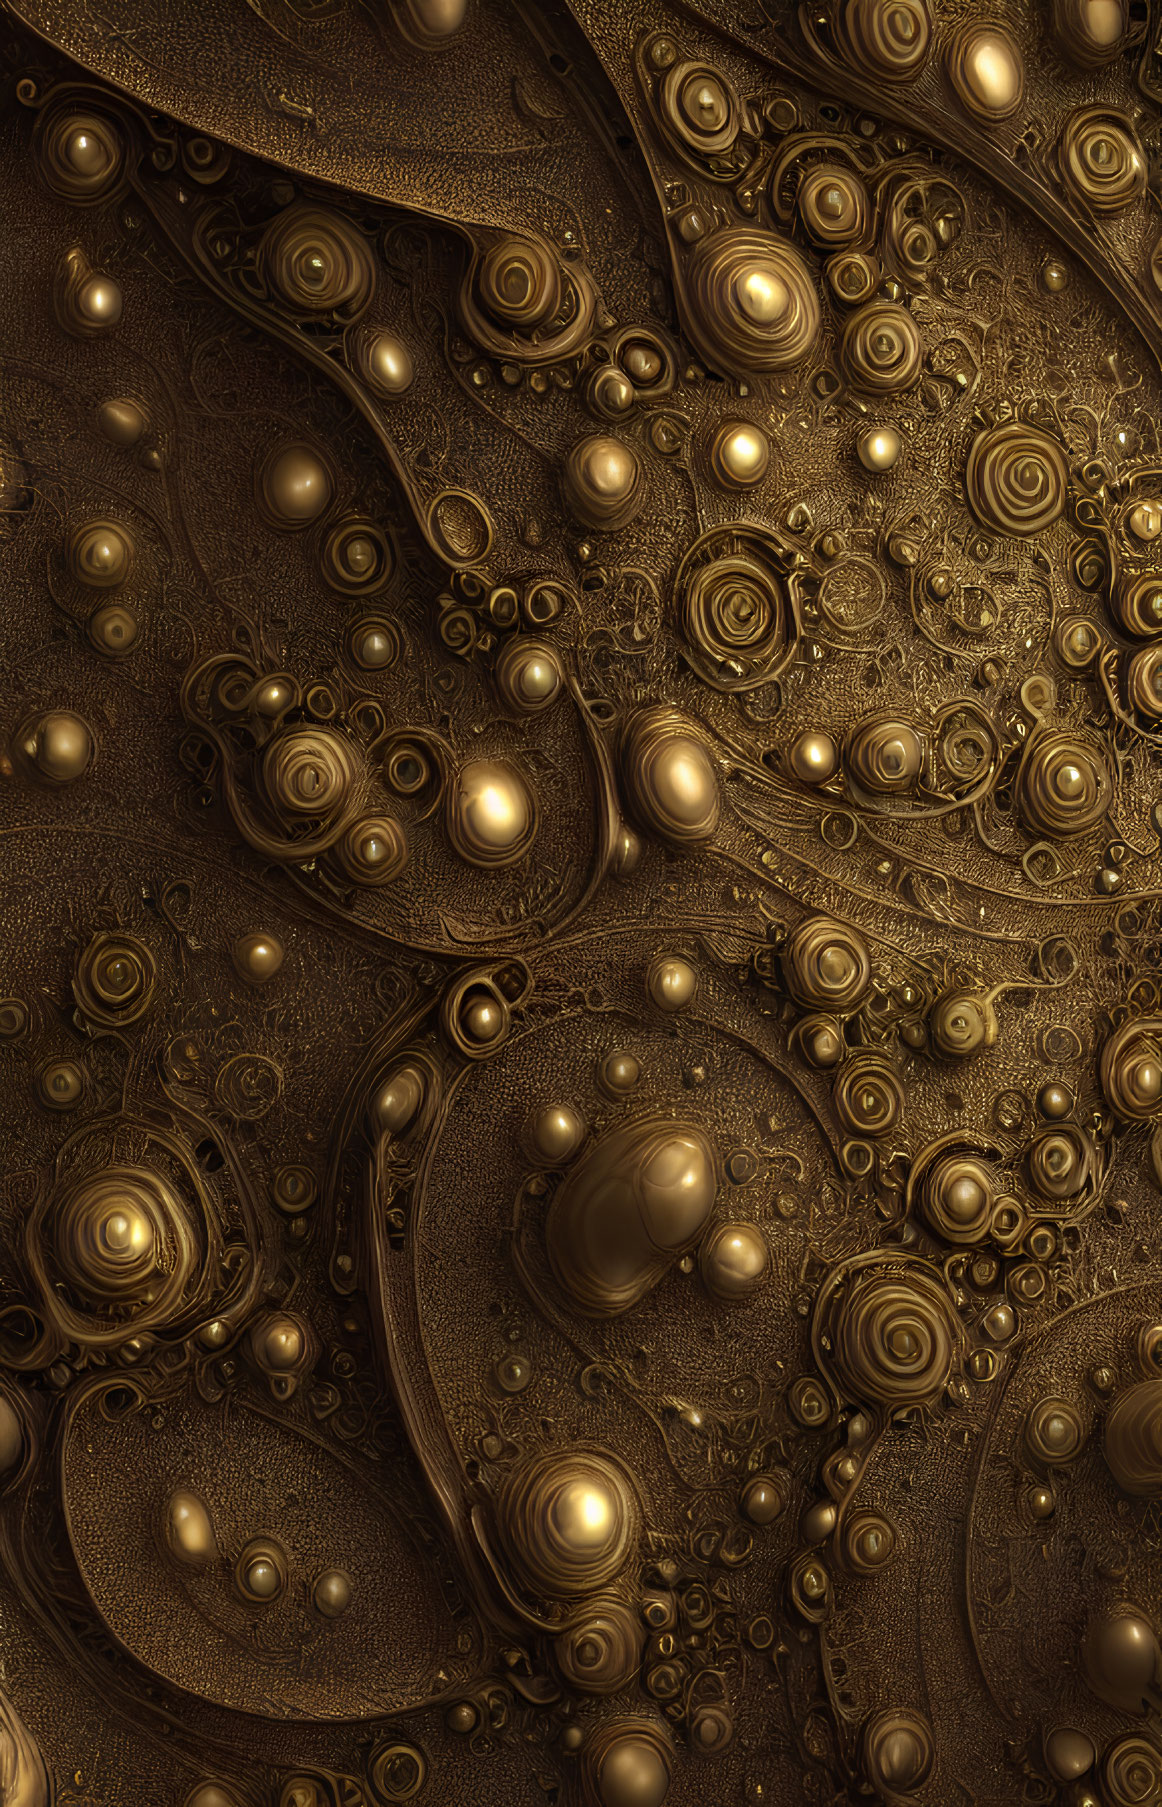 Intricate Fractal Design of Golden Gears and Spheres